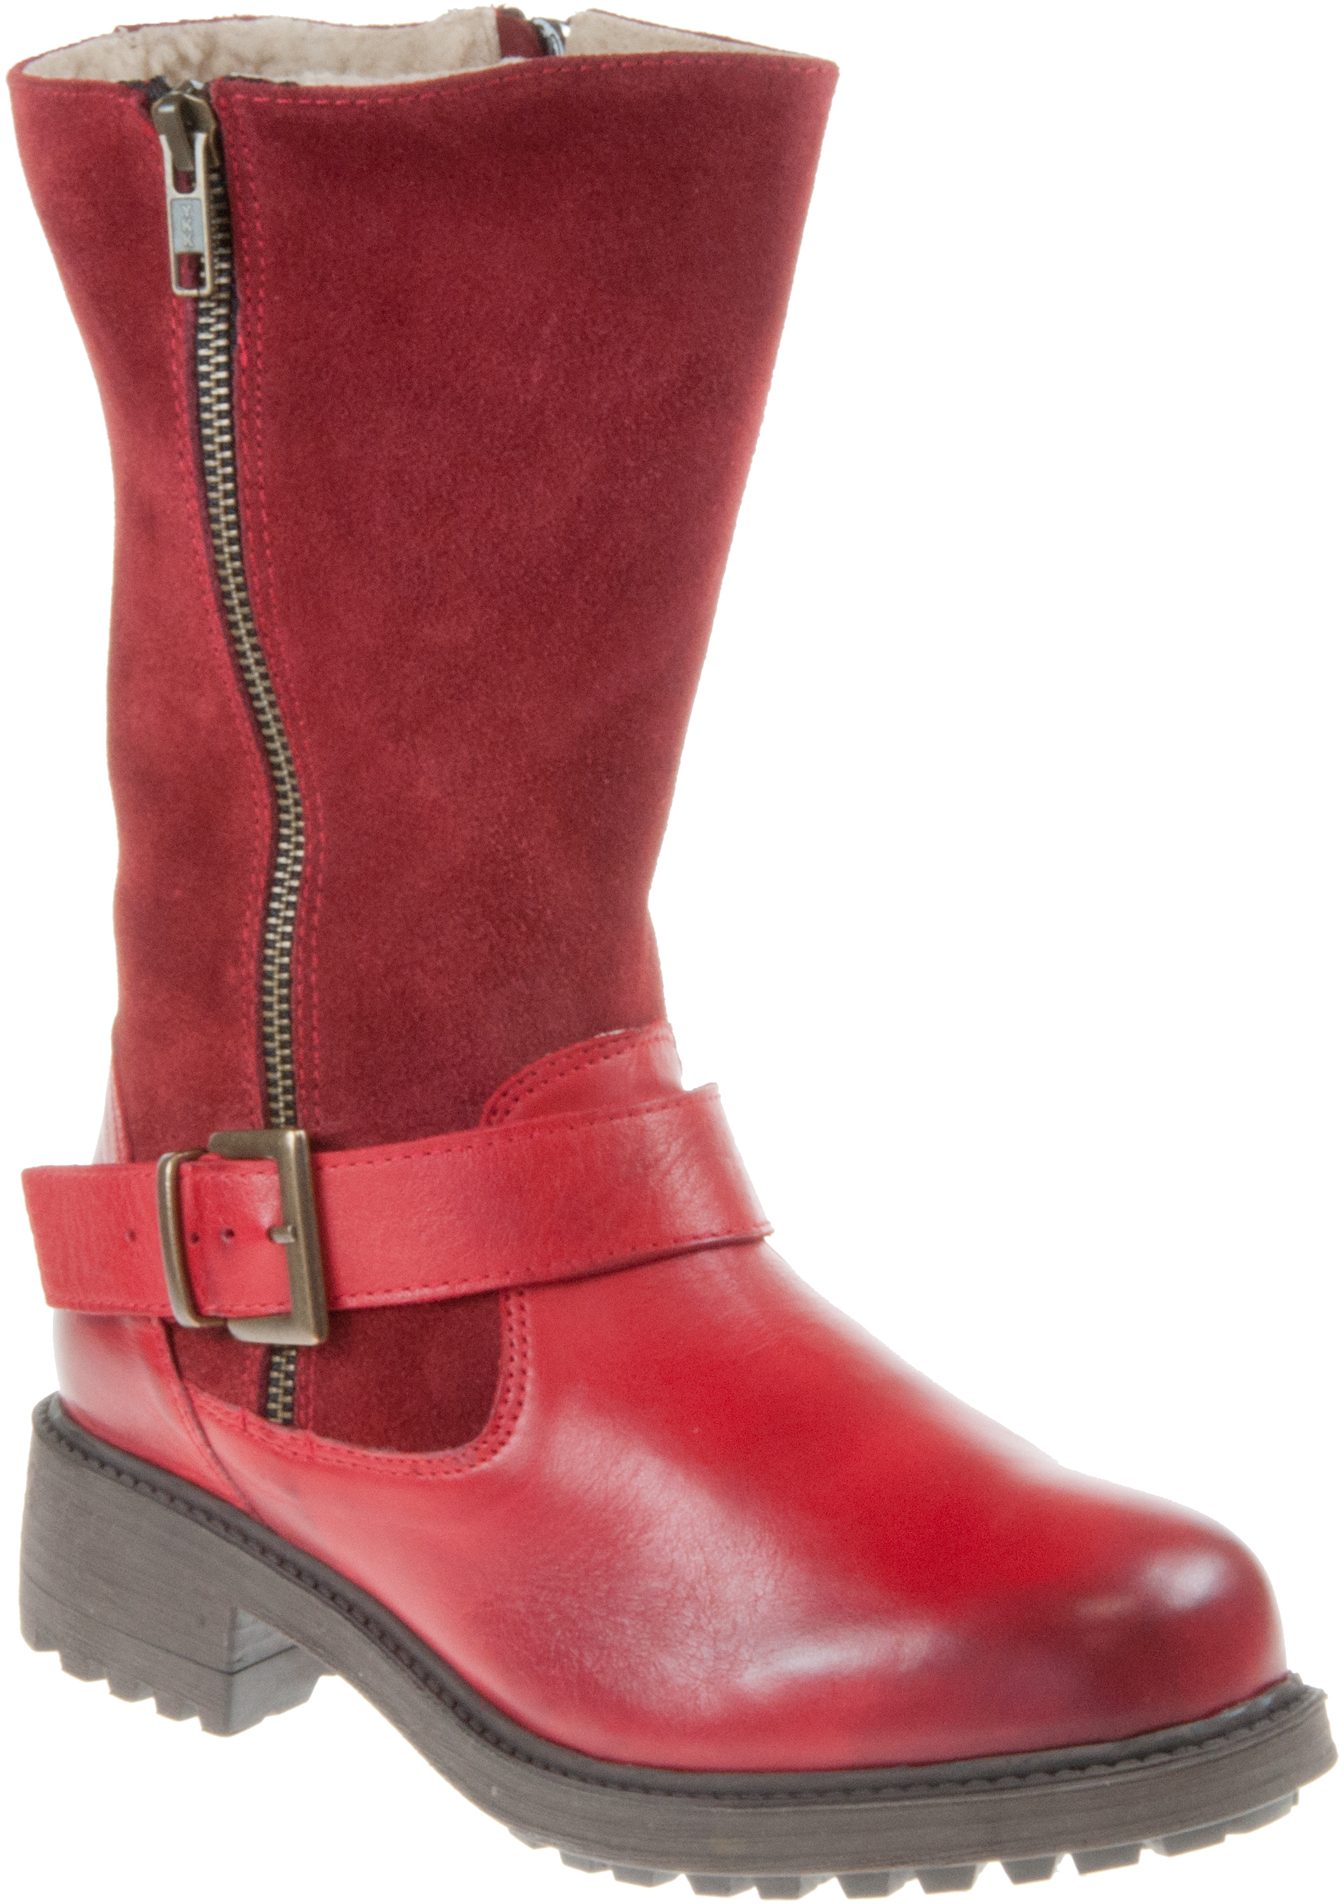 Adesso Jess Scarlet A5512 - Calf Boots - Humphries Shoes